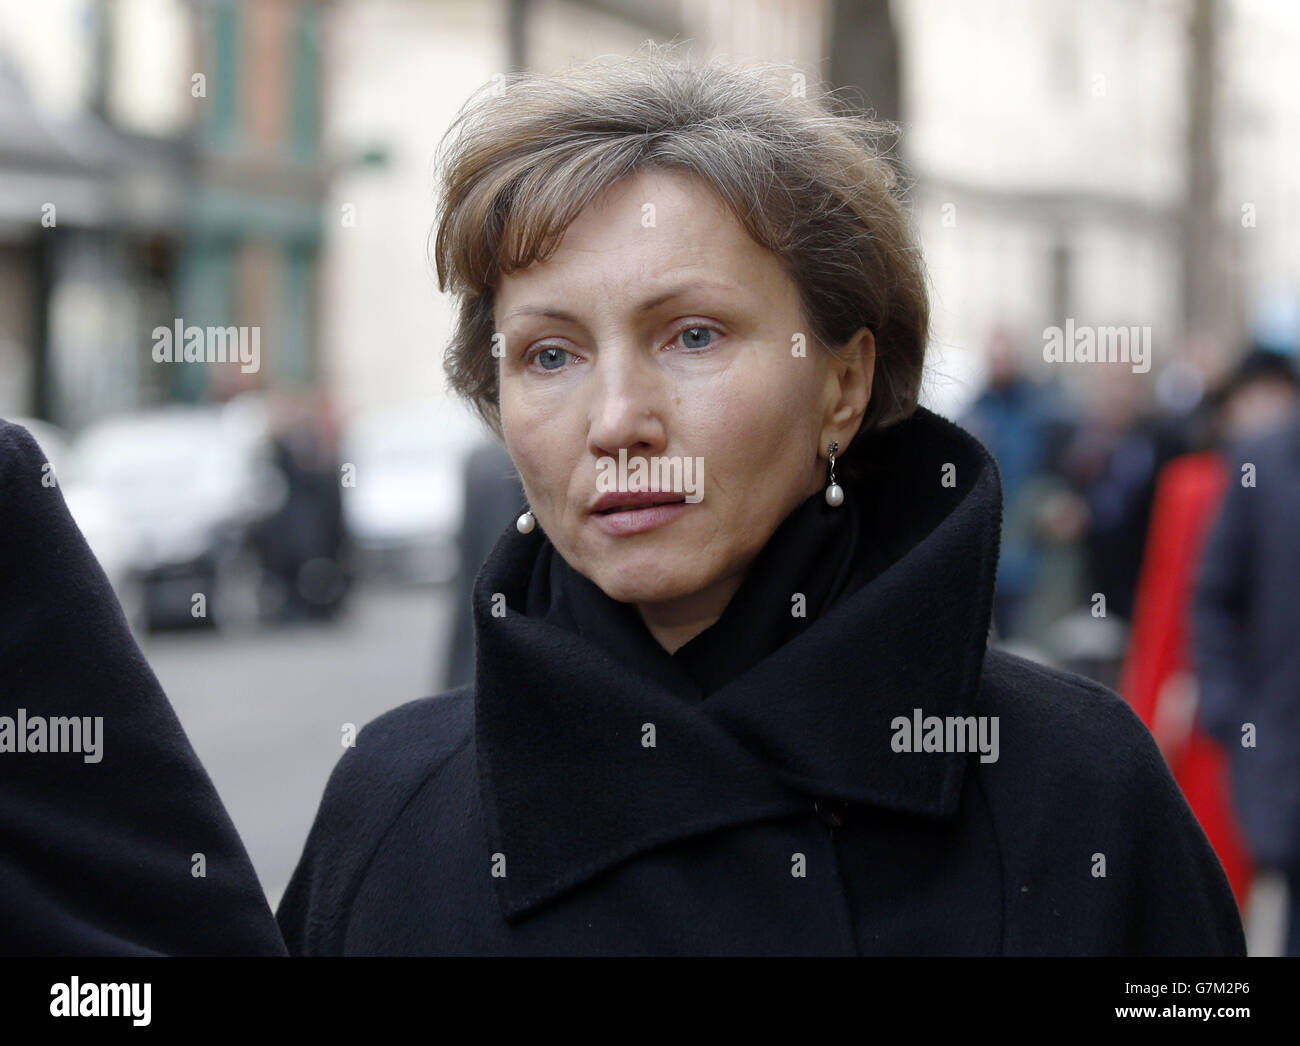 Marina Litvinenko outside the Royal Courts of Justice, London, where the long-awaited public inquiry into the death of poisoned spy Alexander Litvinenko is finally set to open, more than eight years after his death. Stock Photo